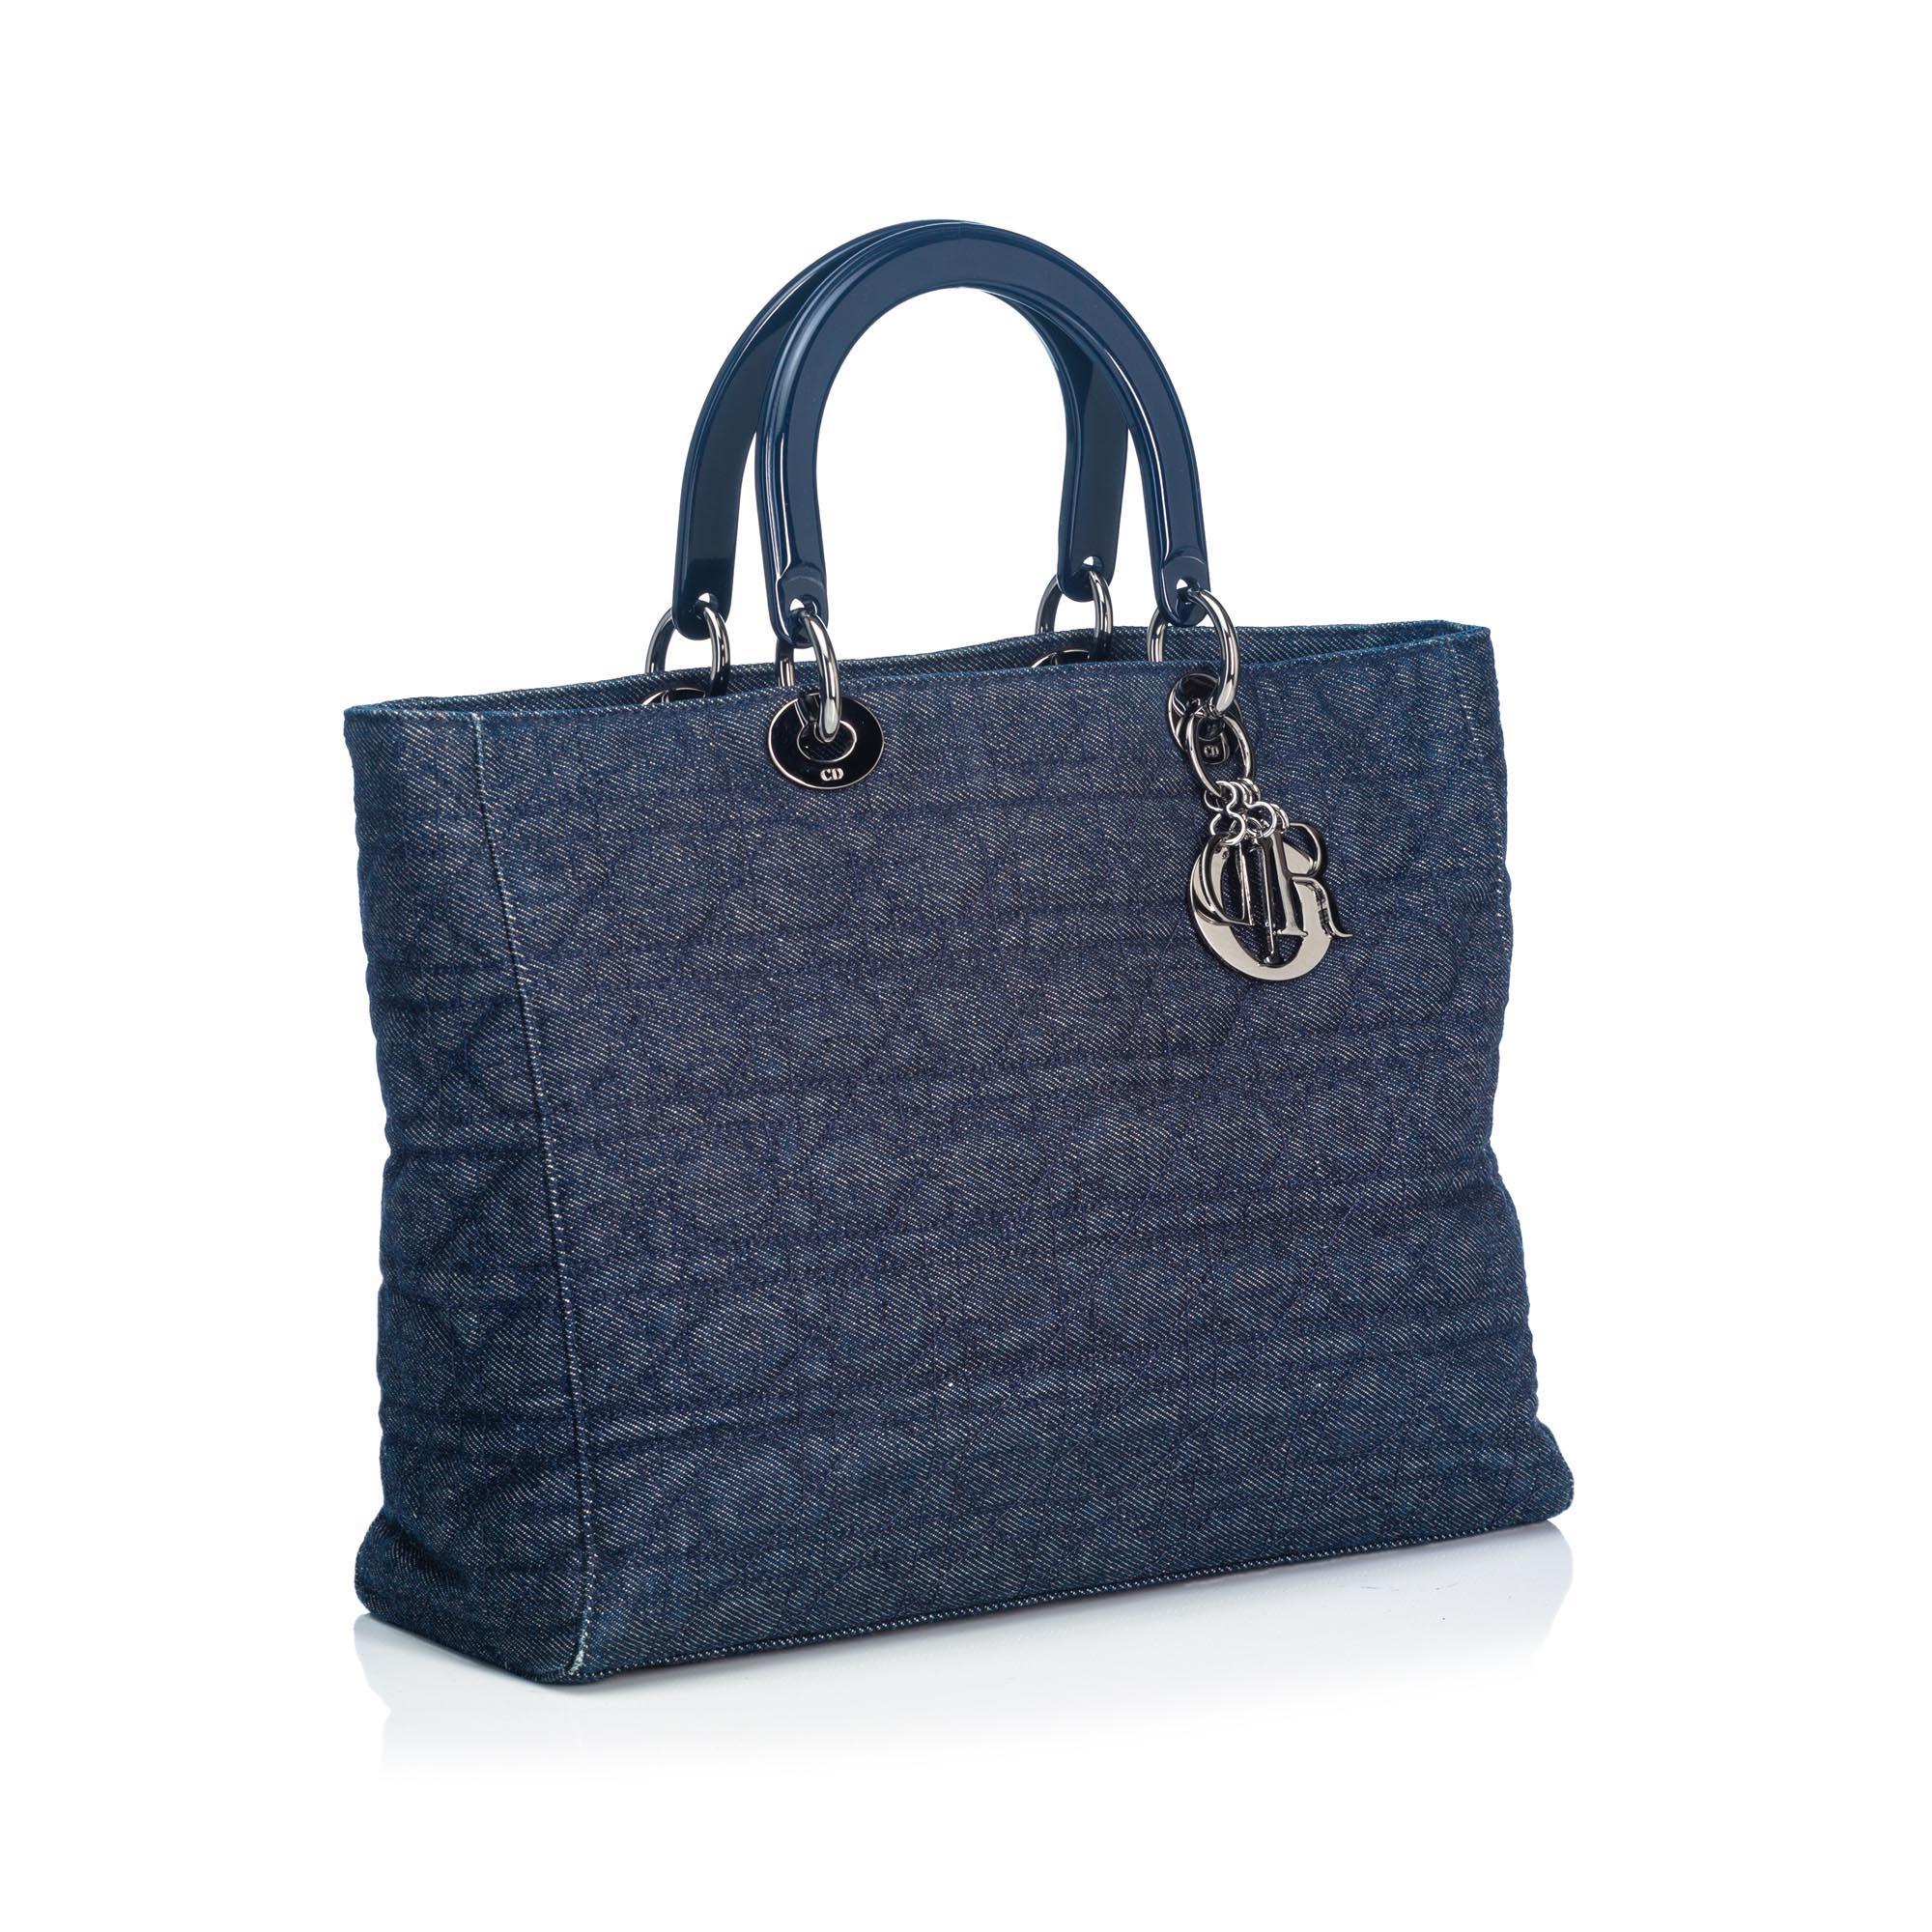 The Lady Dior features a cannage denim body, rolled patent leather handles, a top zip closure, and interior zip and open pockets. It carries as B+ condition rating.

Inclusions: 
Dust Bag

Dimensions:
Length: 25.00 cm
Width: 33.00 cm
Depth: 12.00